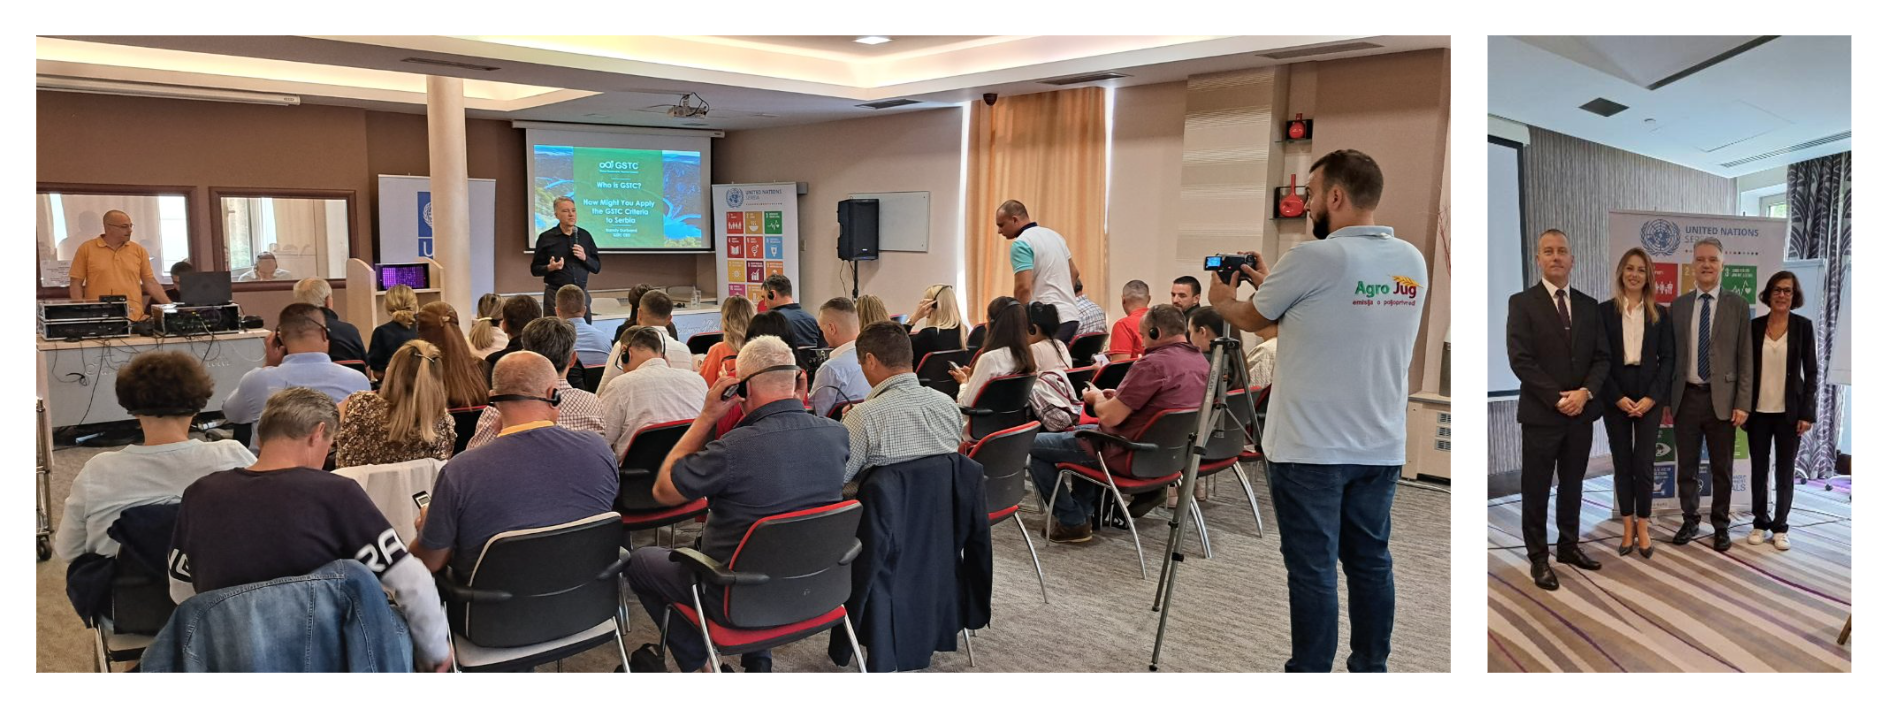 GSTC Trainings on Sustainable Tourism in Serbia